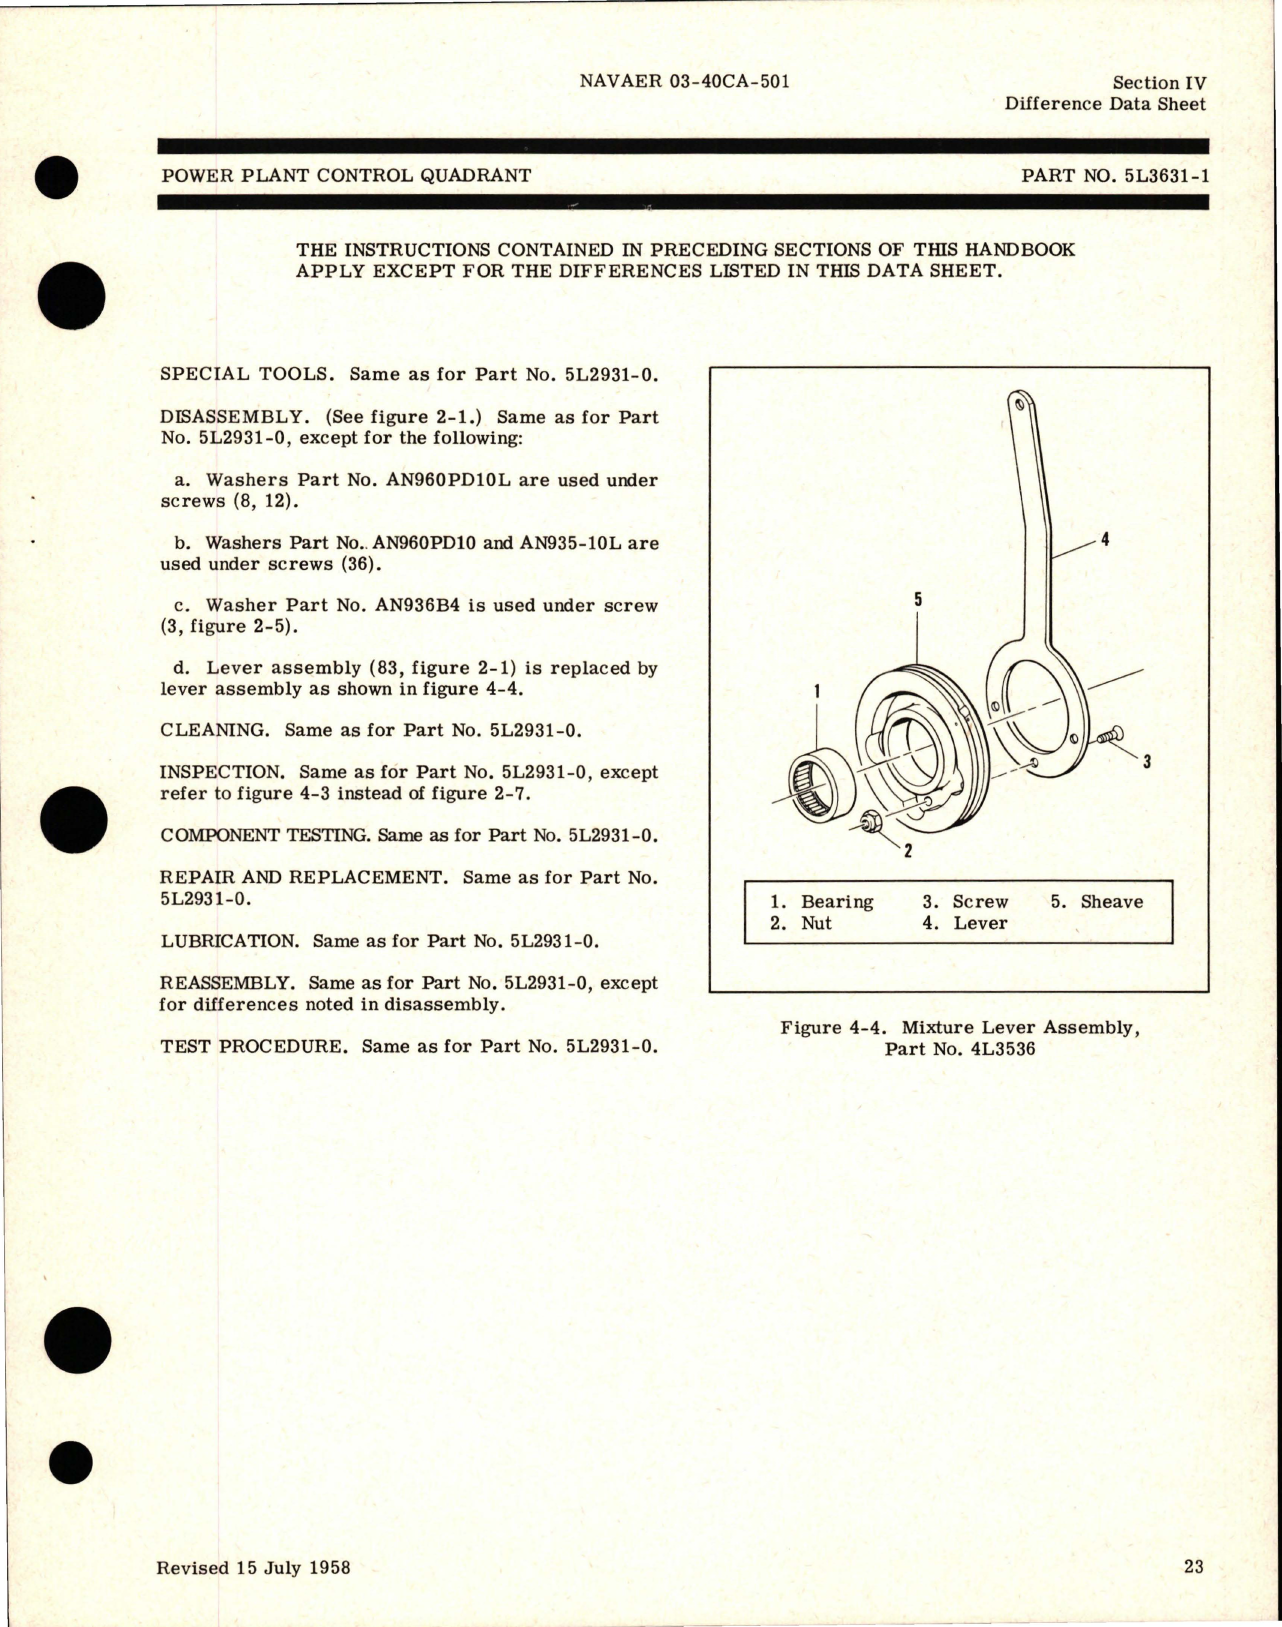 Sample page 7 from AirCorps Library document: Overhaul Instructions for Power Plant Control Quadrant - Parts 5L2931-0, 5L2931-1, 5L2931-2, 5L2931-3, 5L3631-0, 5L3631-1, 5L3631-2, and 5L3631-3